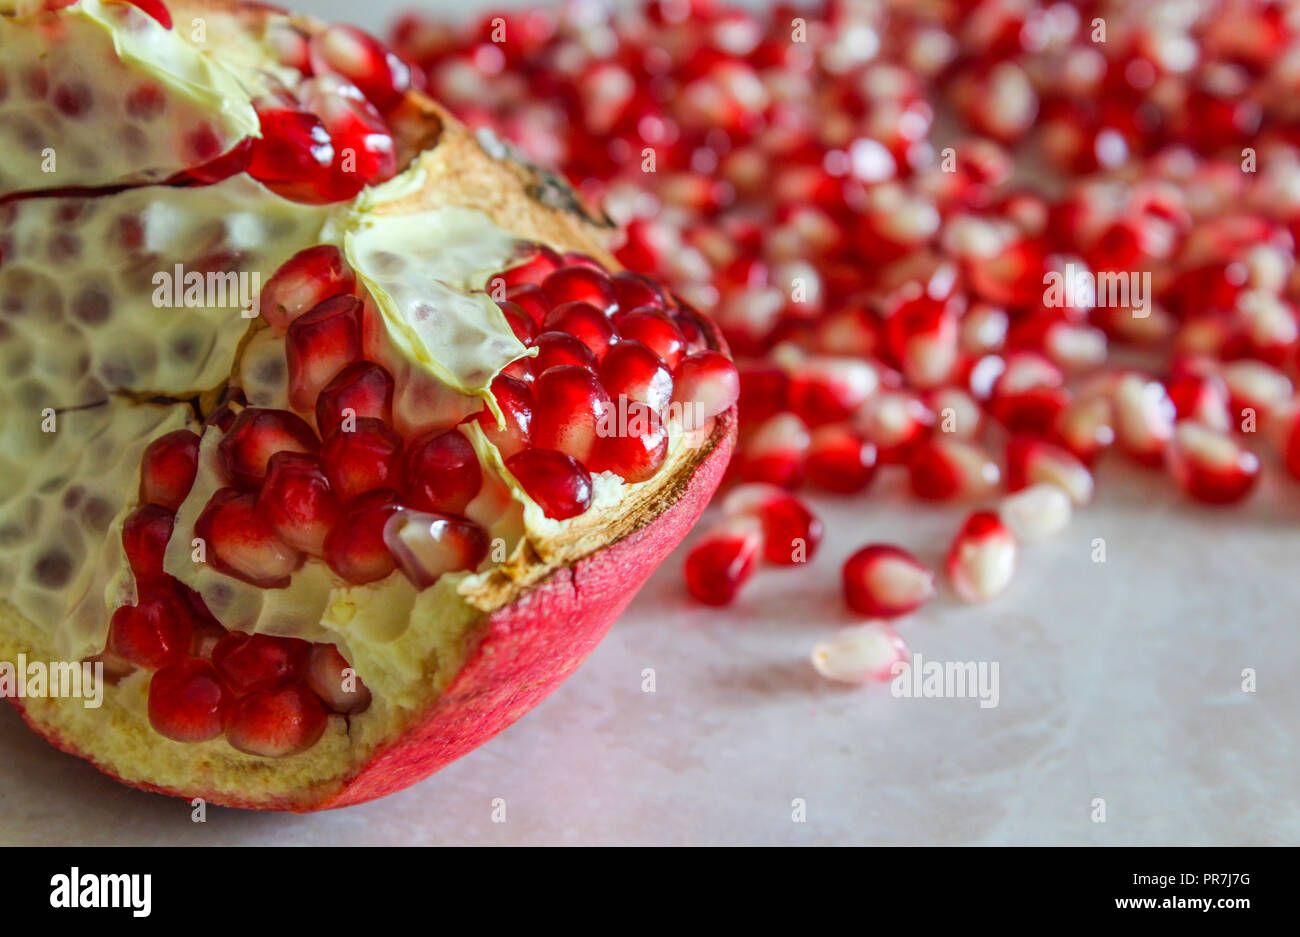 Juicy and fresh pomegranate seeds on table Stock Photo